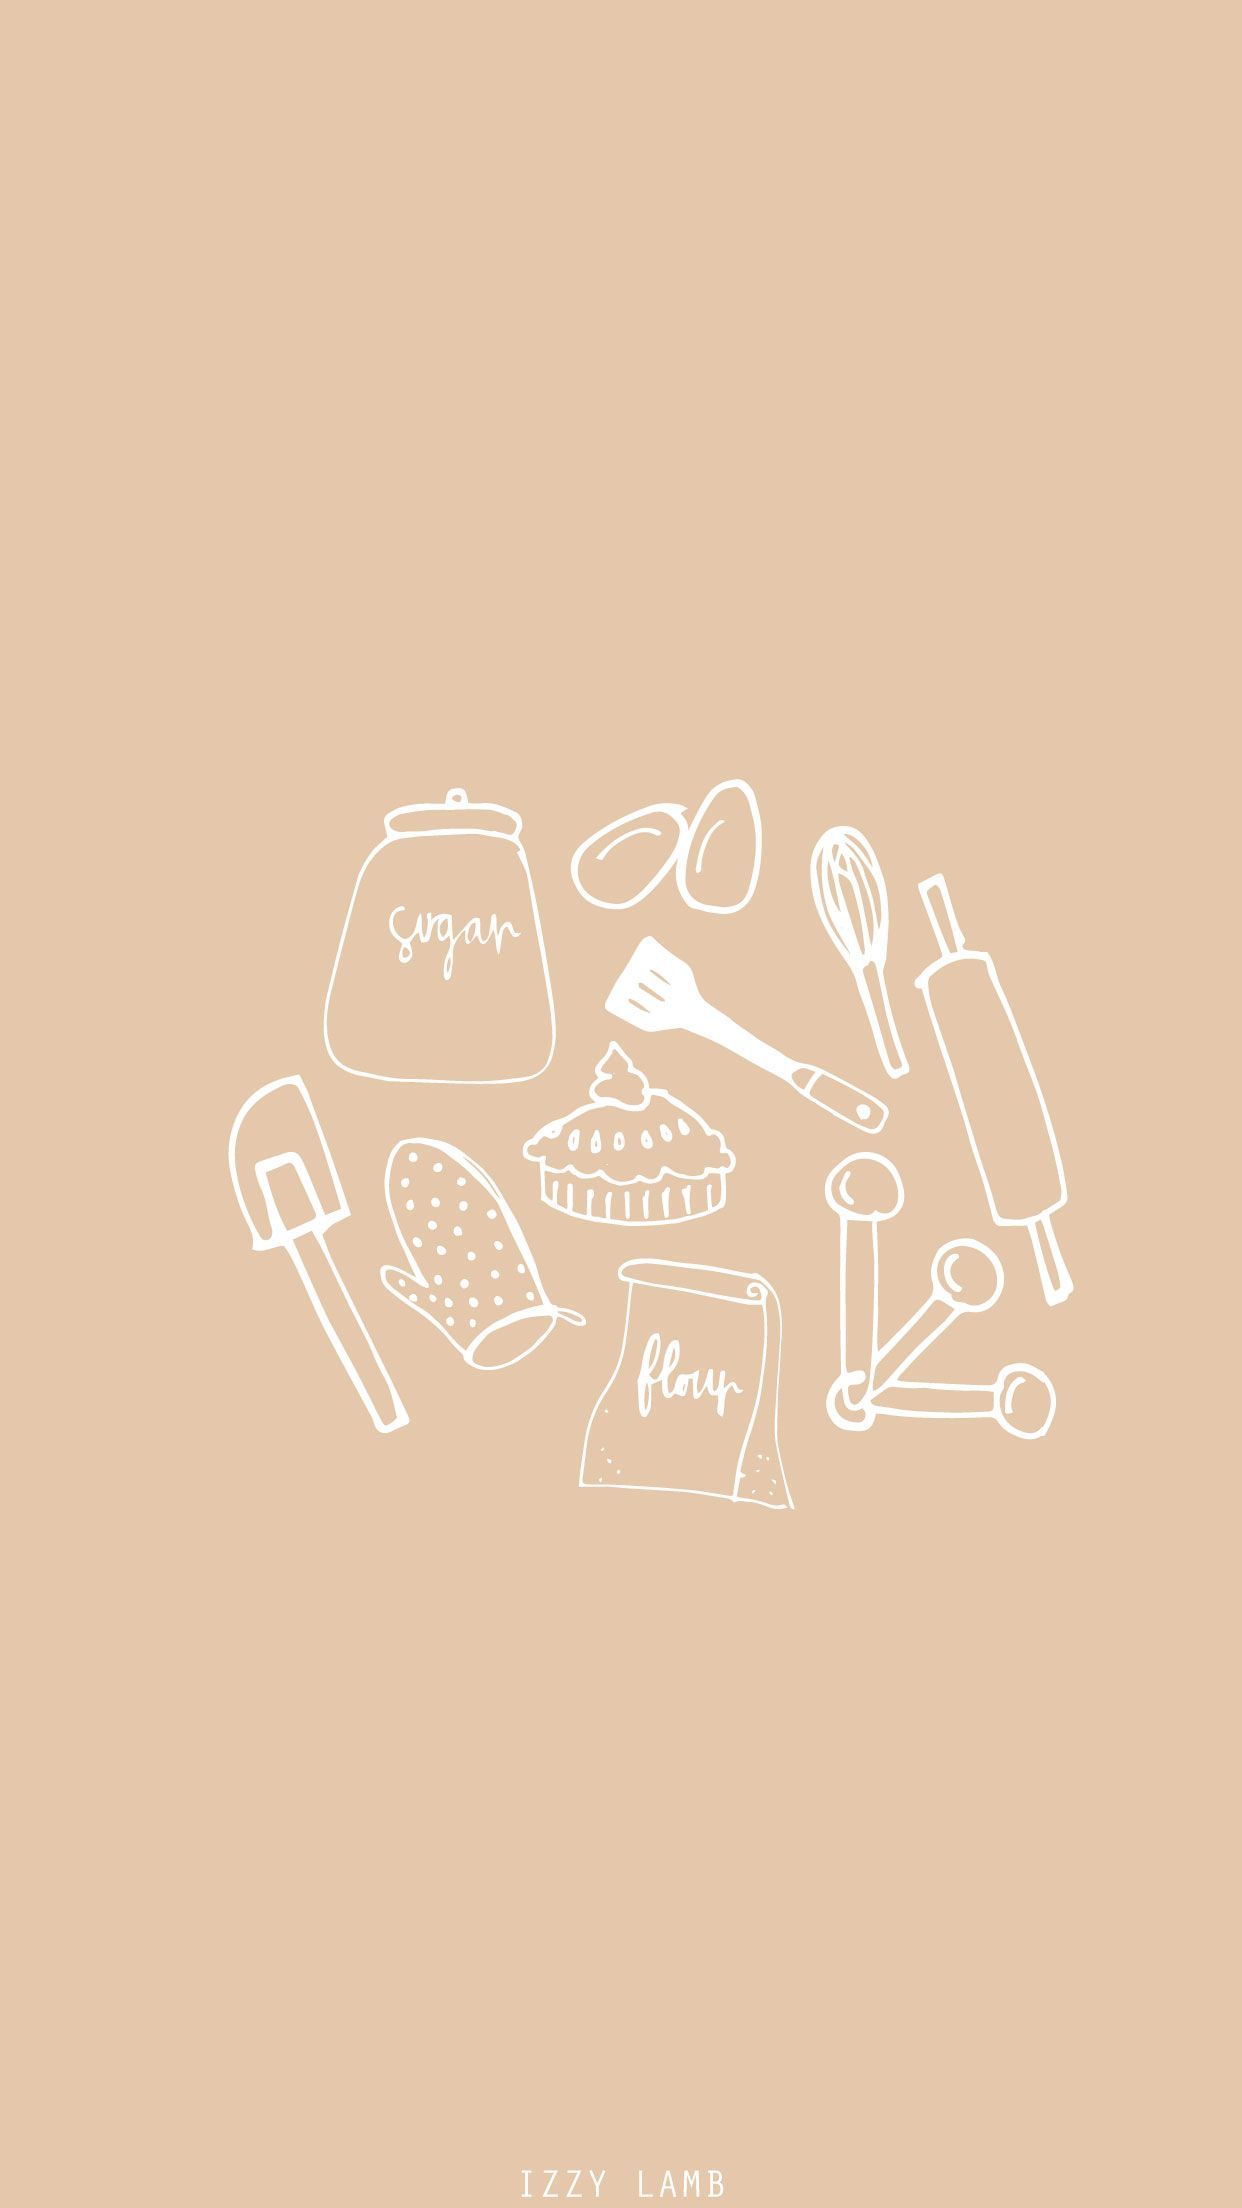 A phone wallpaper illustration of baking equipment and ingredients, including a rolling pin, whisk, pie, sugar bowl, flour bag, and oven mitts. - Bakery